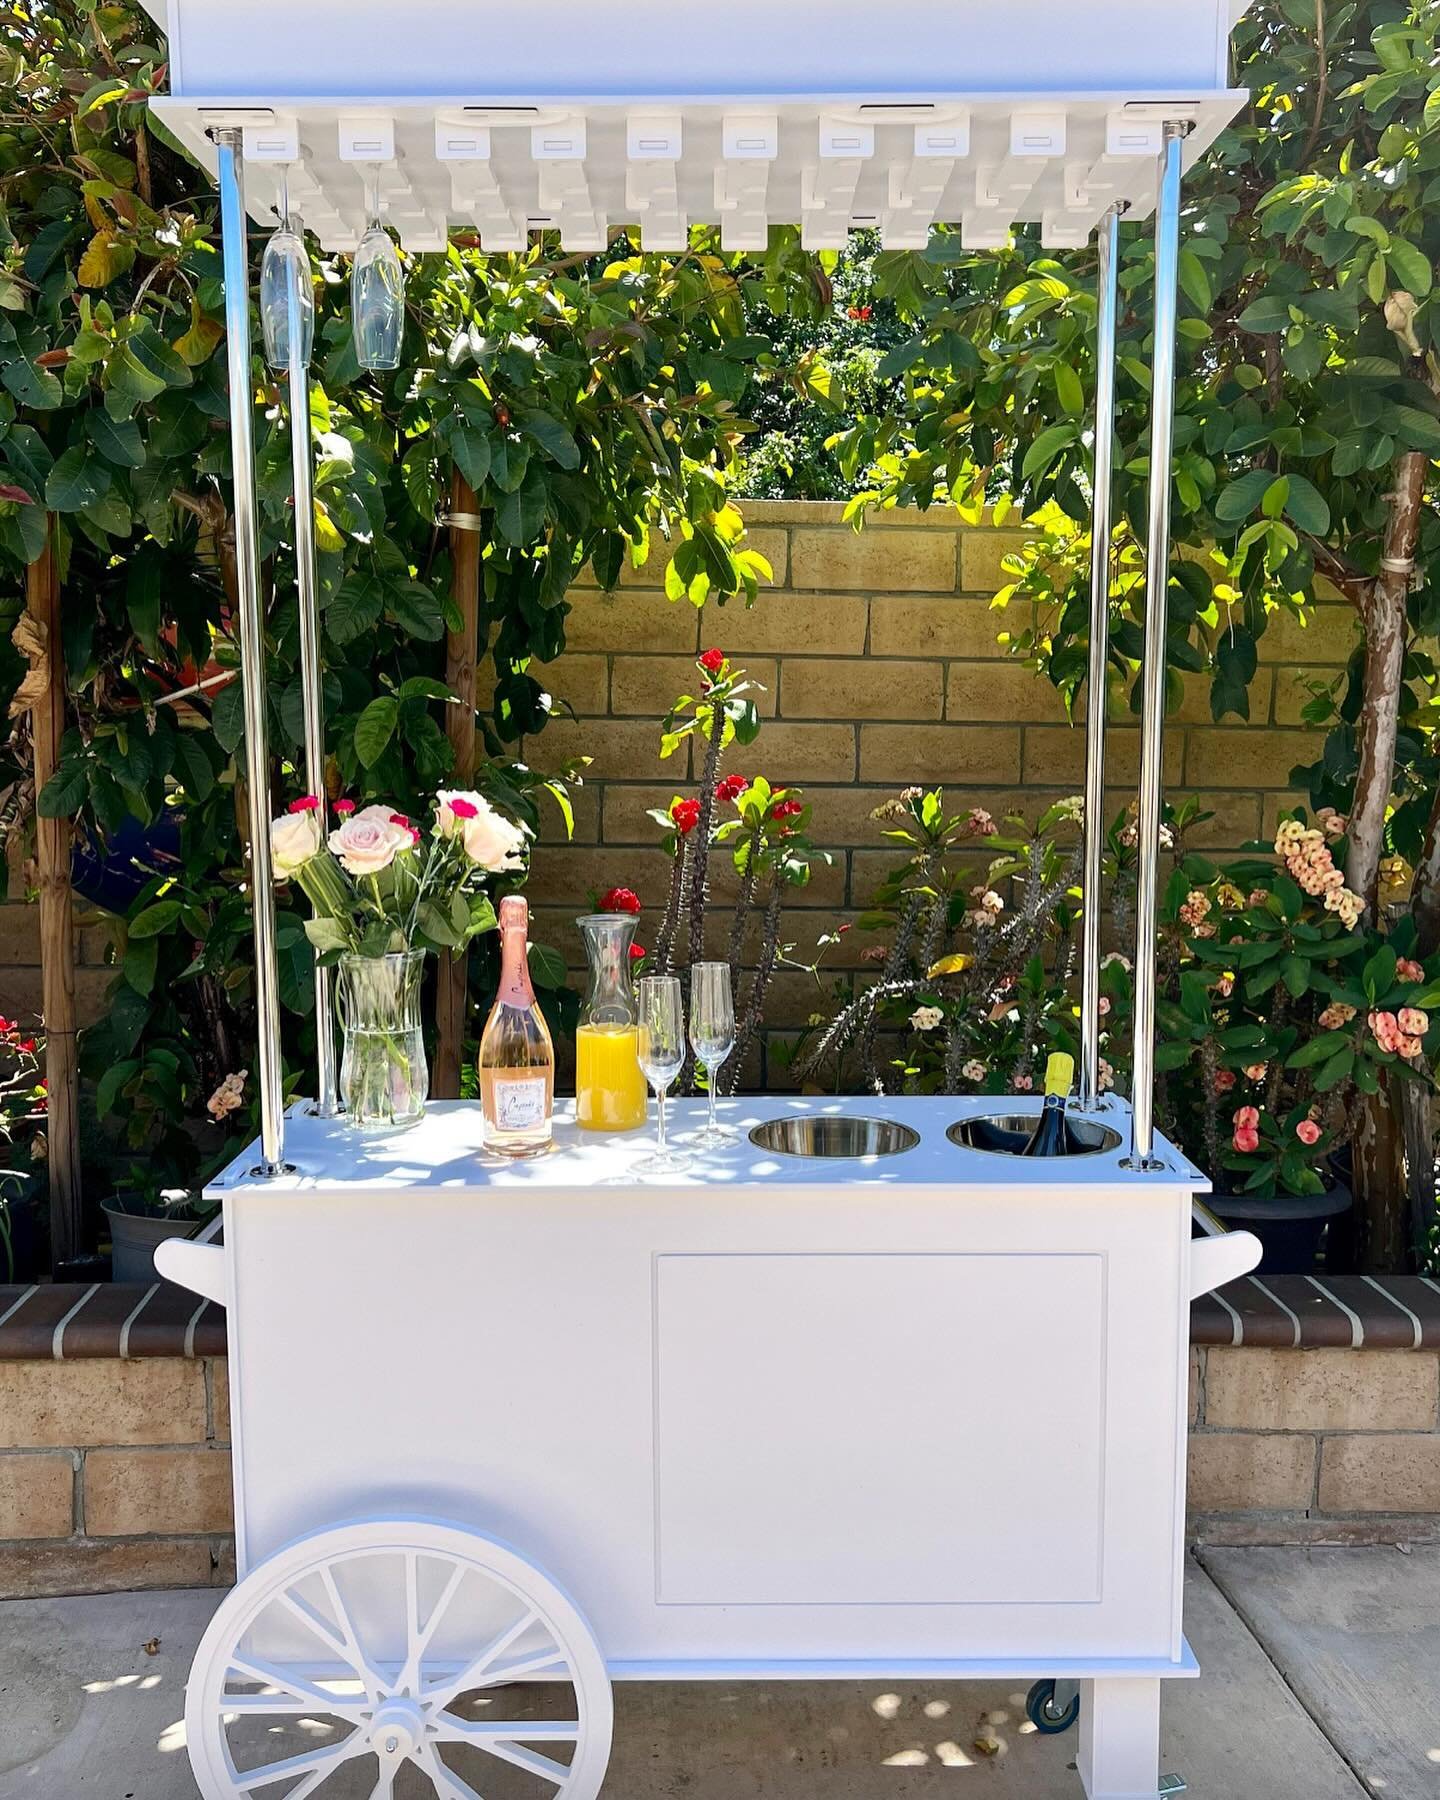 Introducing our Champagne Cart &ndash; the ultimate party companion that&rsquo;s not just about champagne! 🍾 Whether you&rsquo;re serving up bubbly, wine, or any other beverages, our versatile cart has got you covered.

This freestanding beauty hold